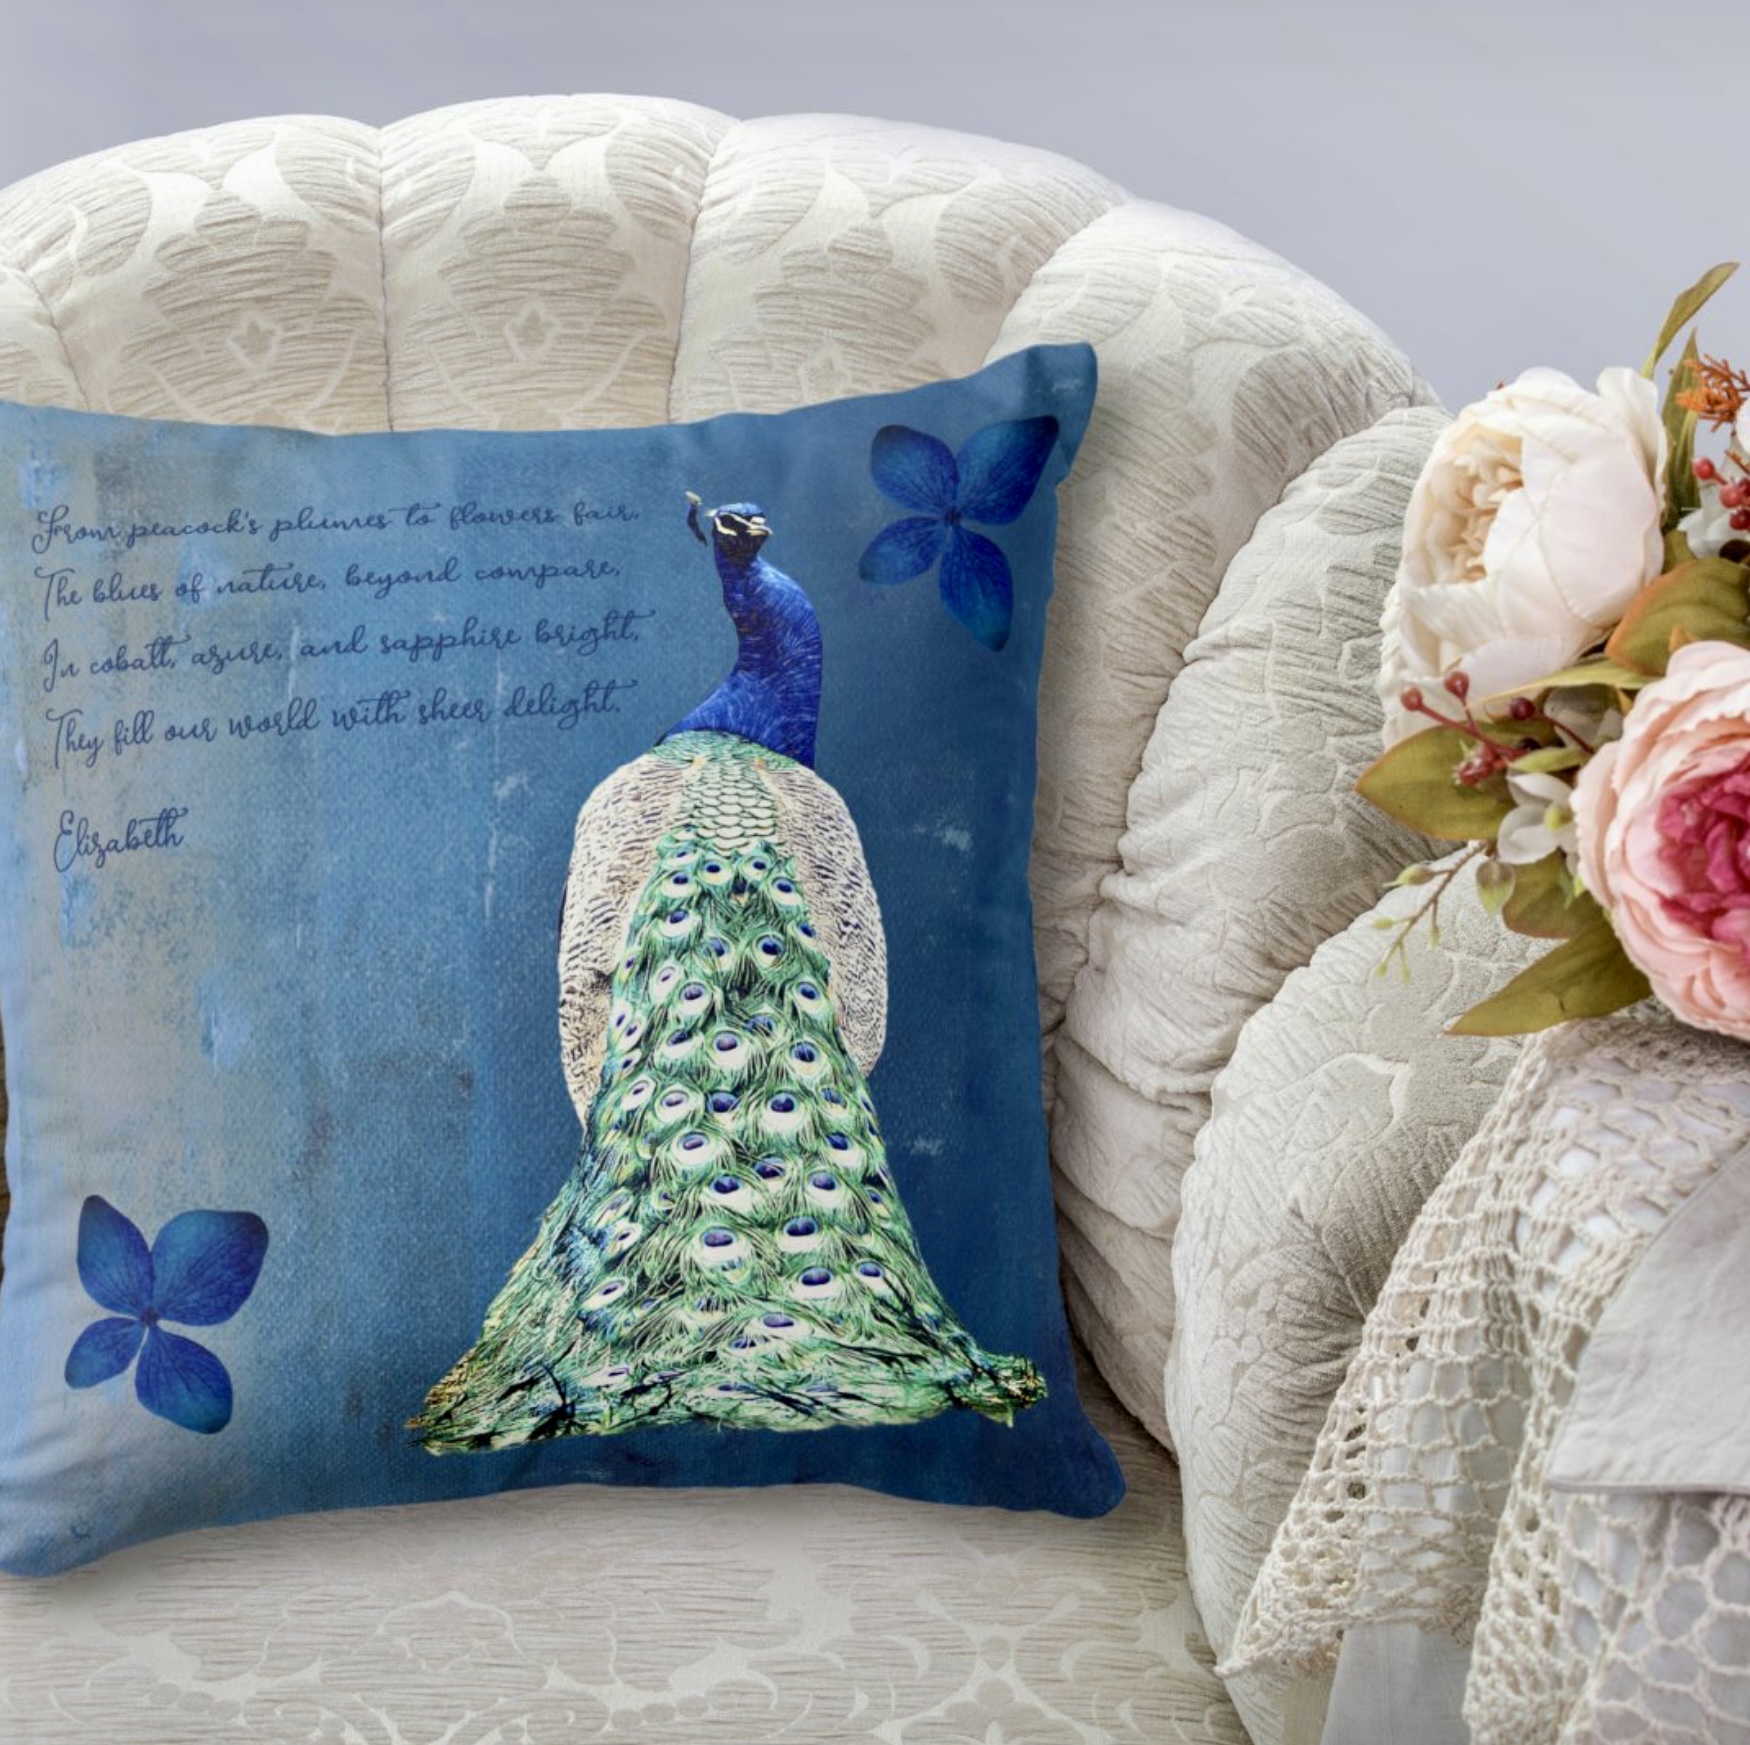 Vintage Peacock Customized Throw Pillow with personalized positive message.